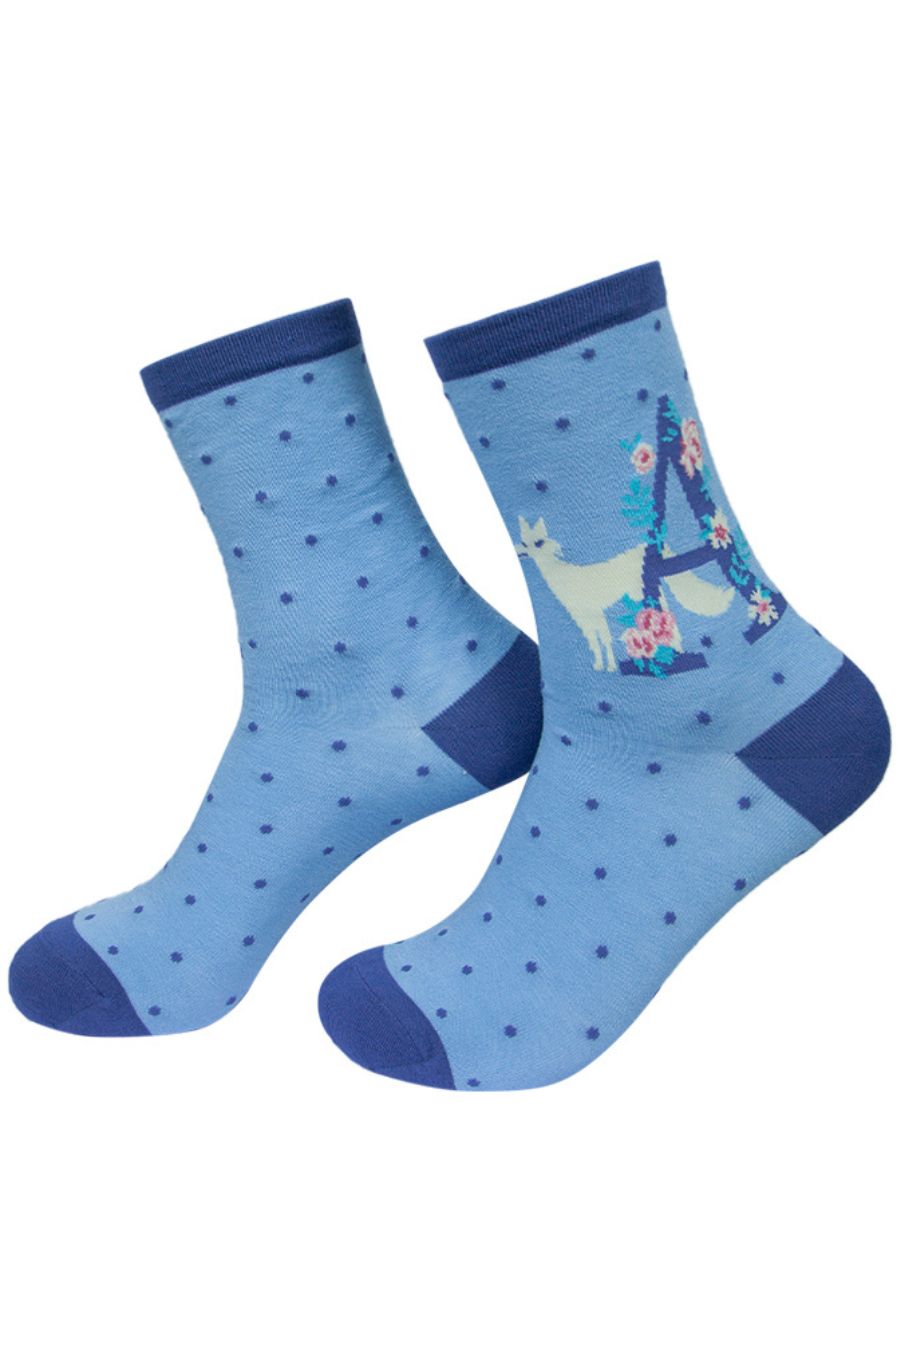 blue ankle socks with a letter A and an alpaca